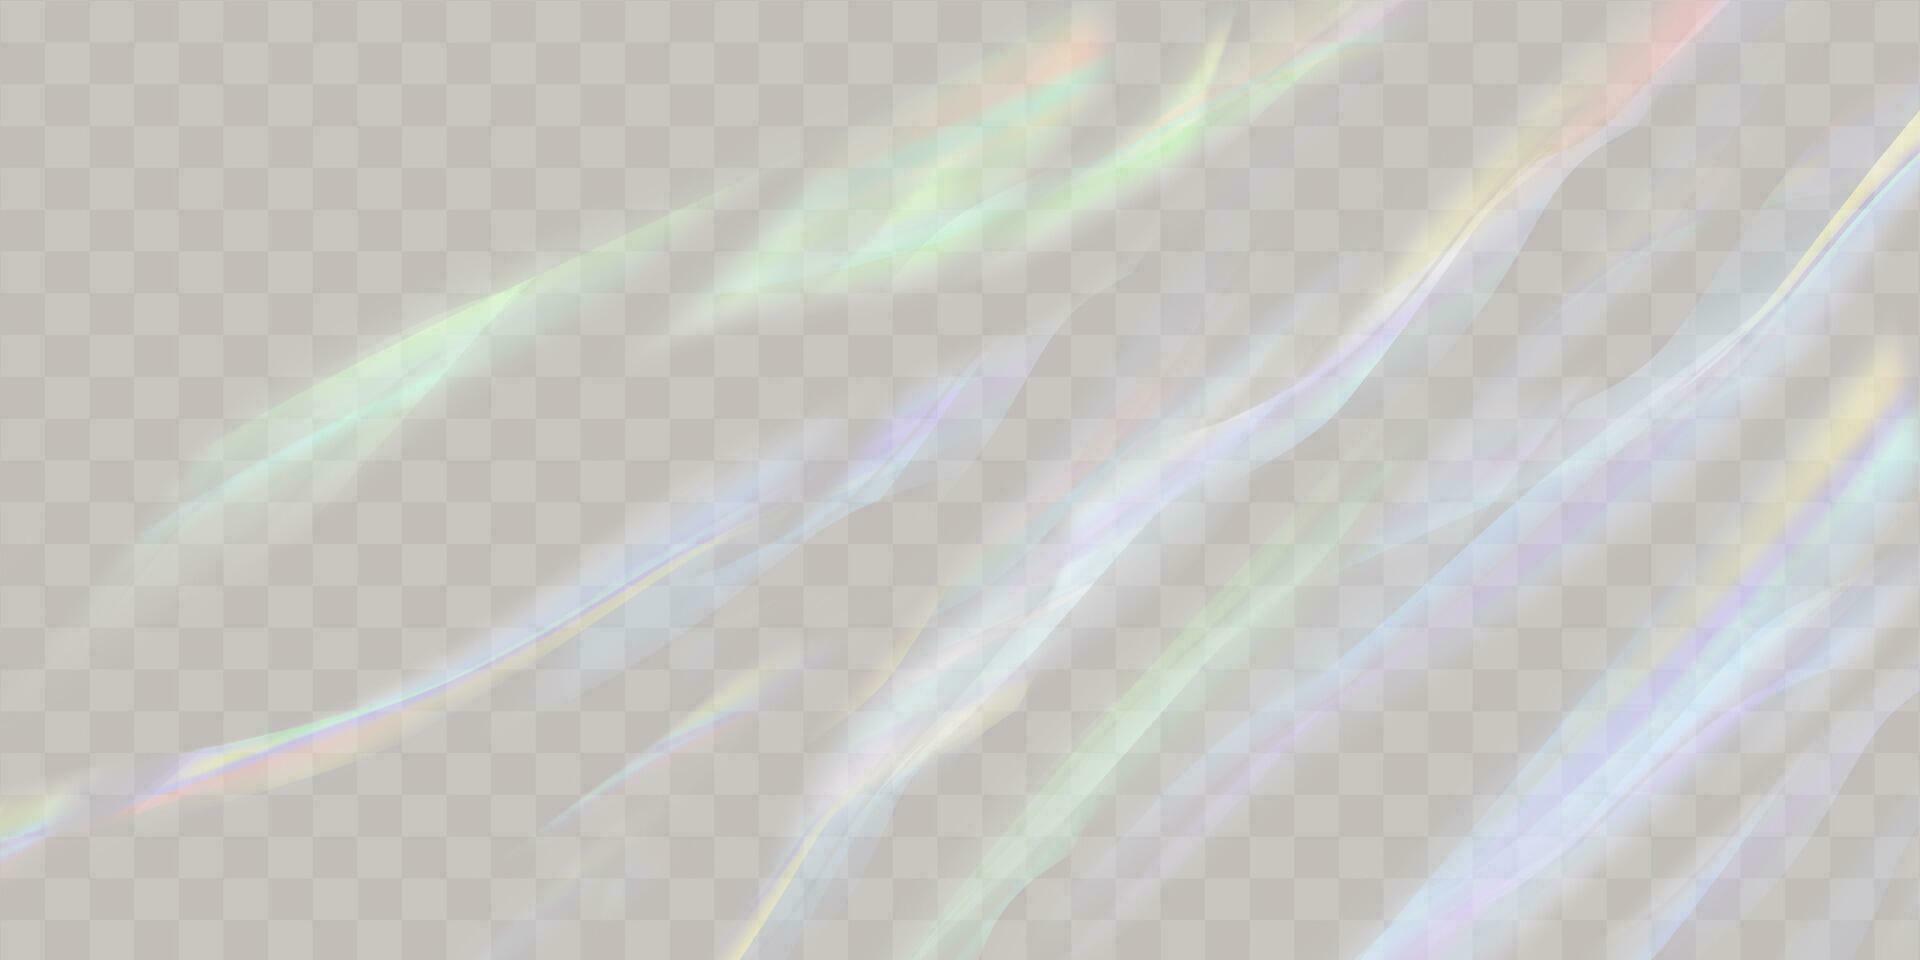 A set of colourful vector lens, crystal rainbow  light  and  flare transparent effects.Overlay for backgrounds.Triangular prism concept.